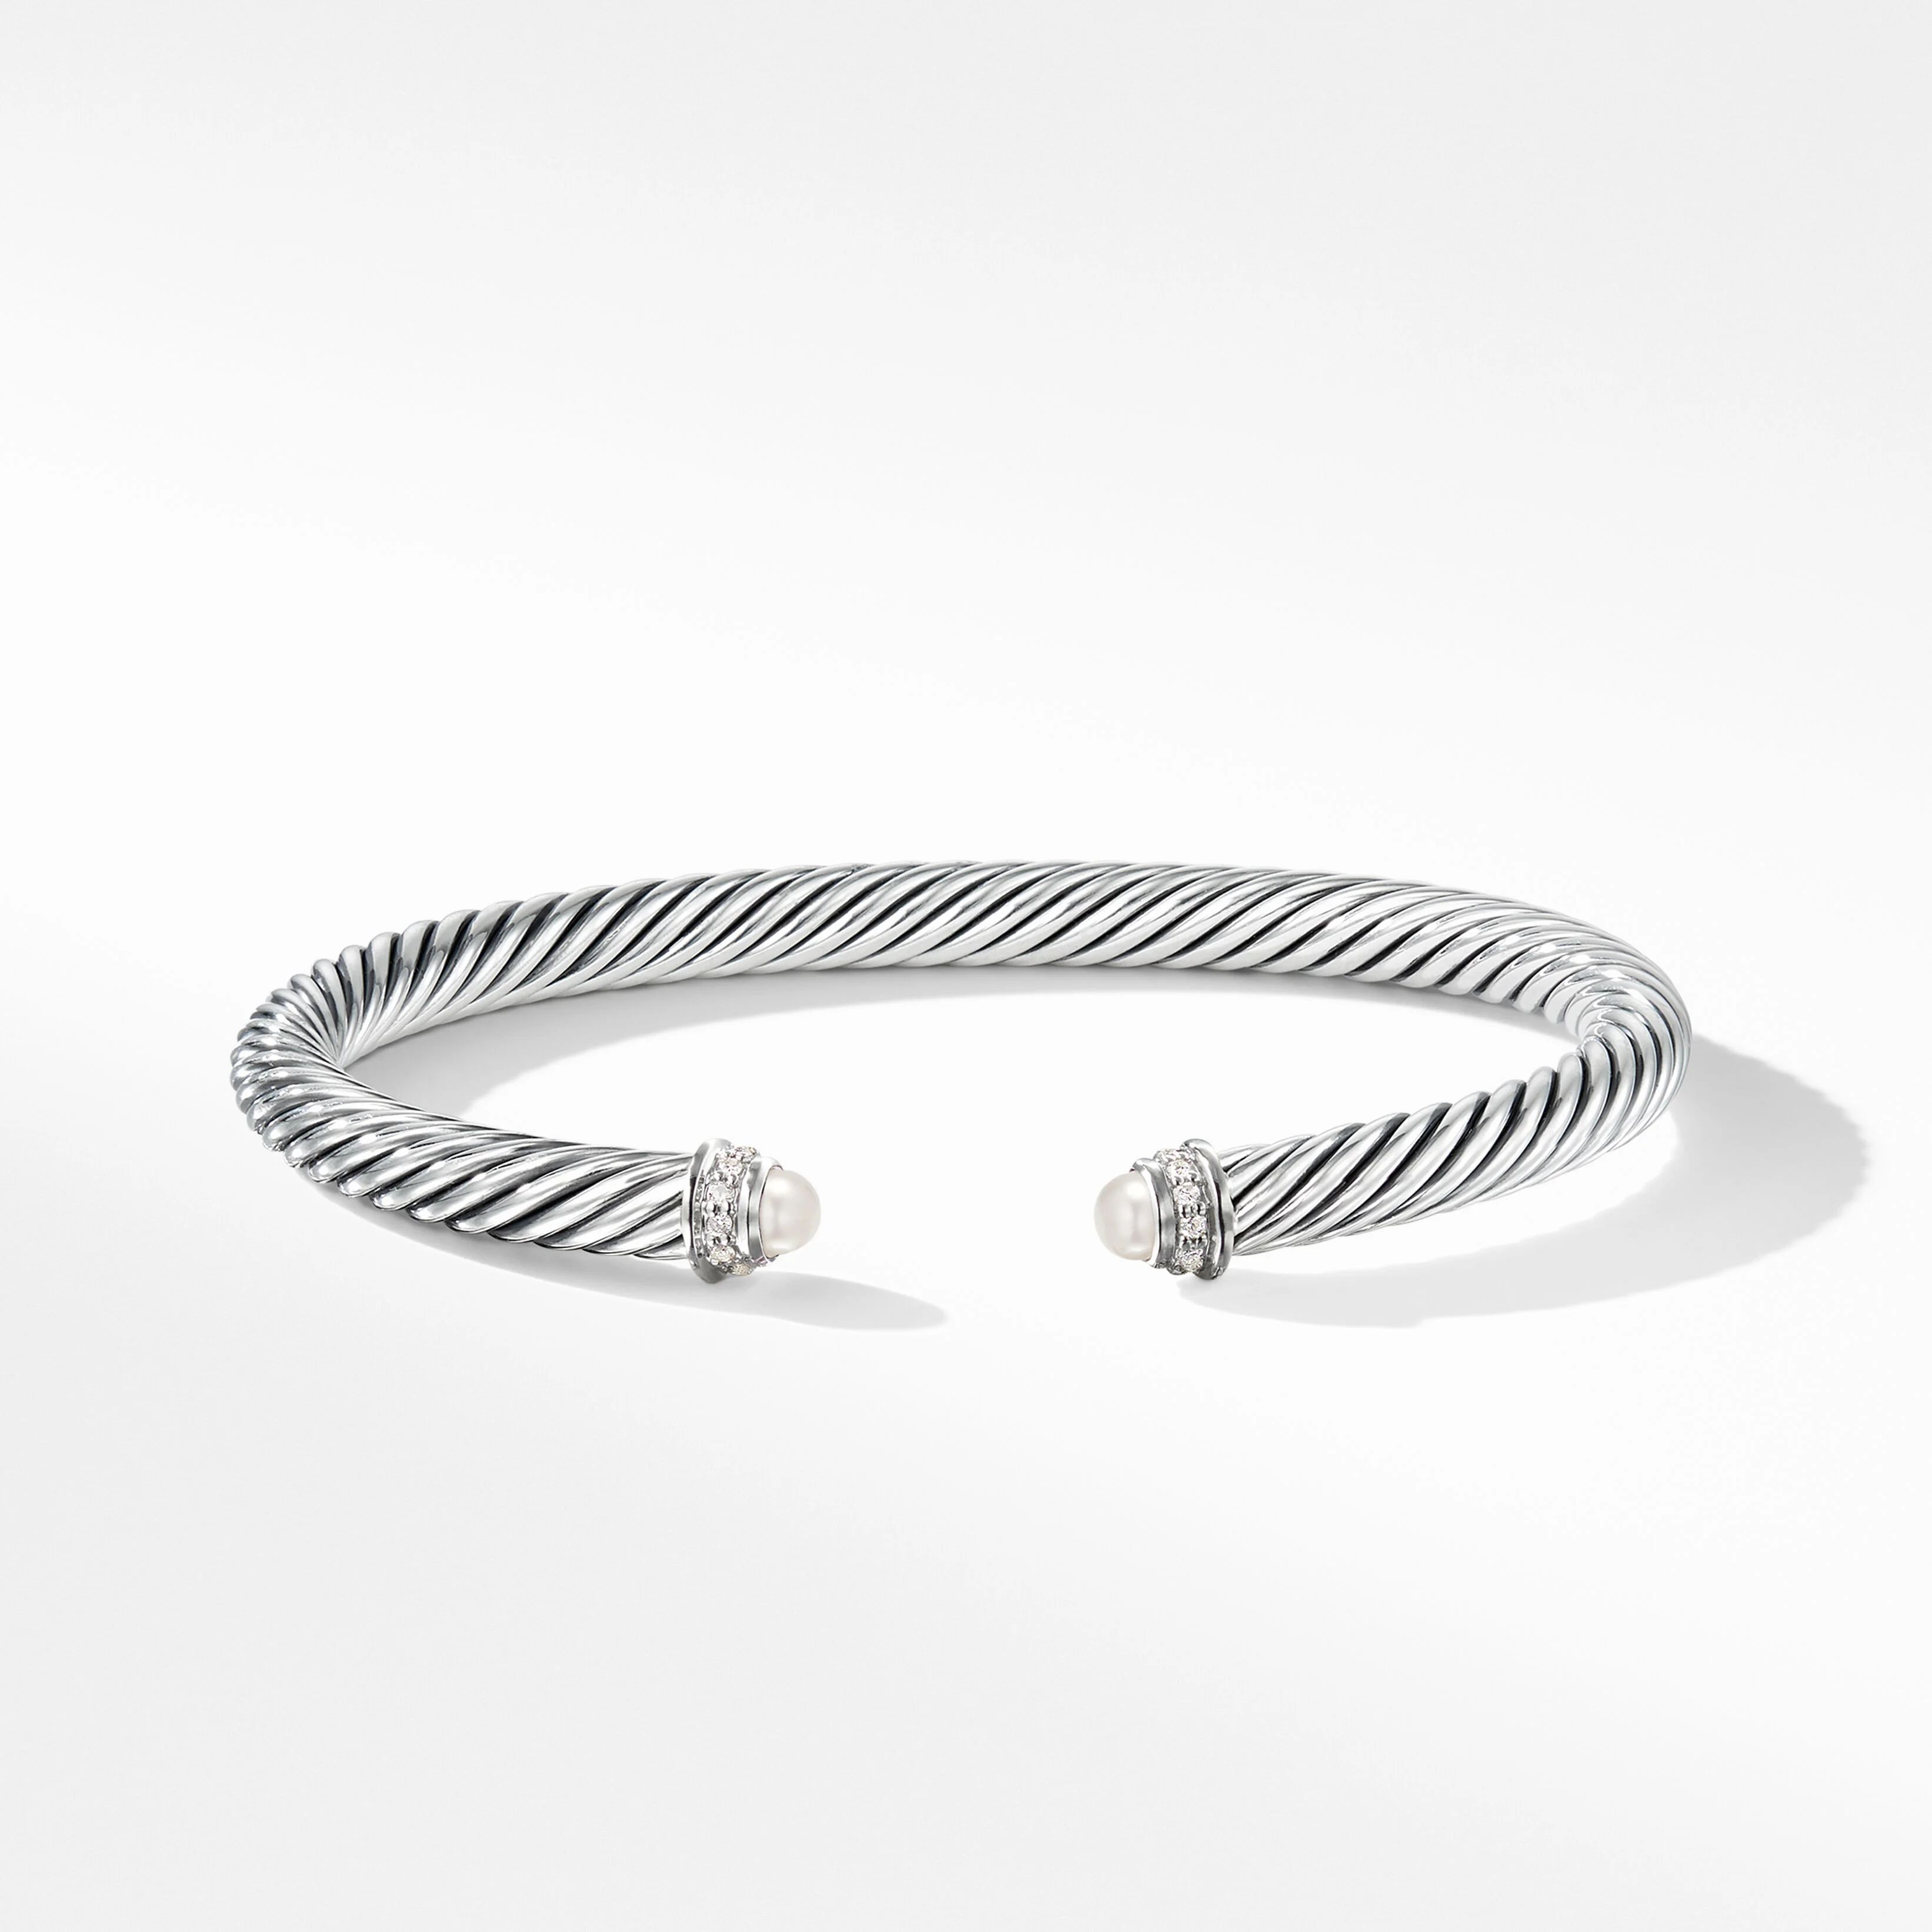 Cable Classics Bracelet in Sterling Silver with Pearls and Pavé Diamonds | David Yurman